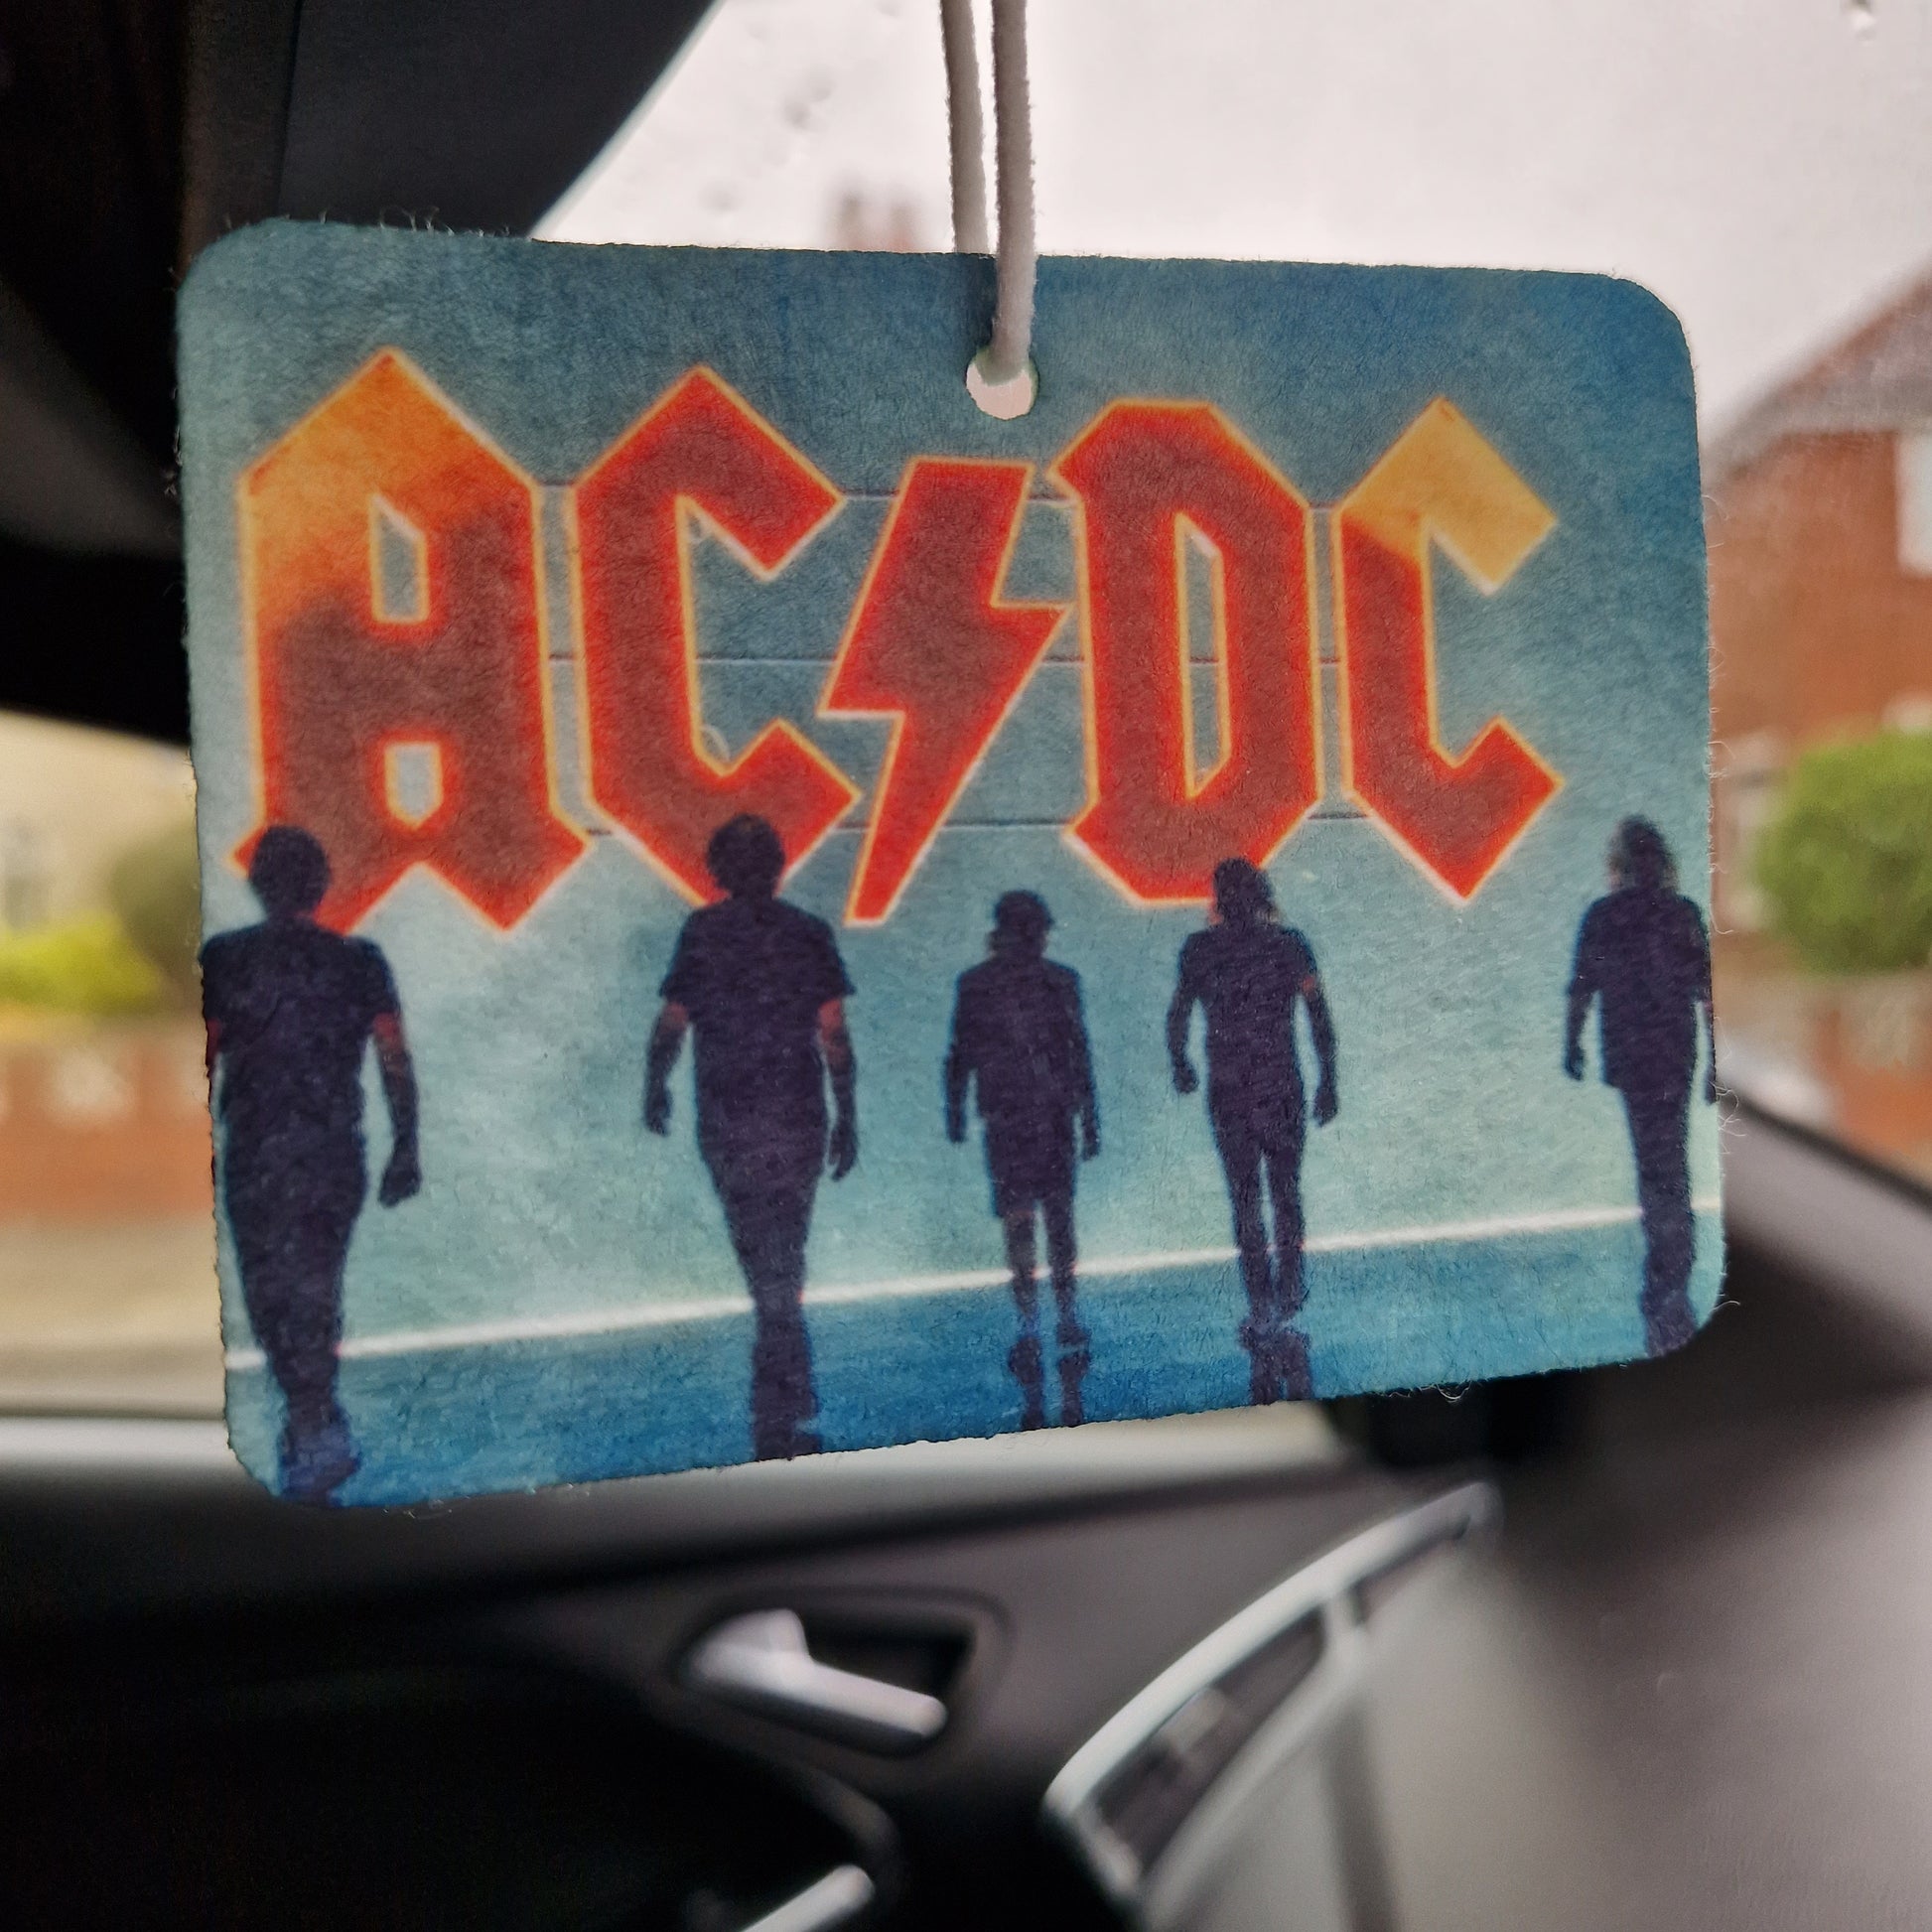 acdc logo picture car air freshener